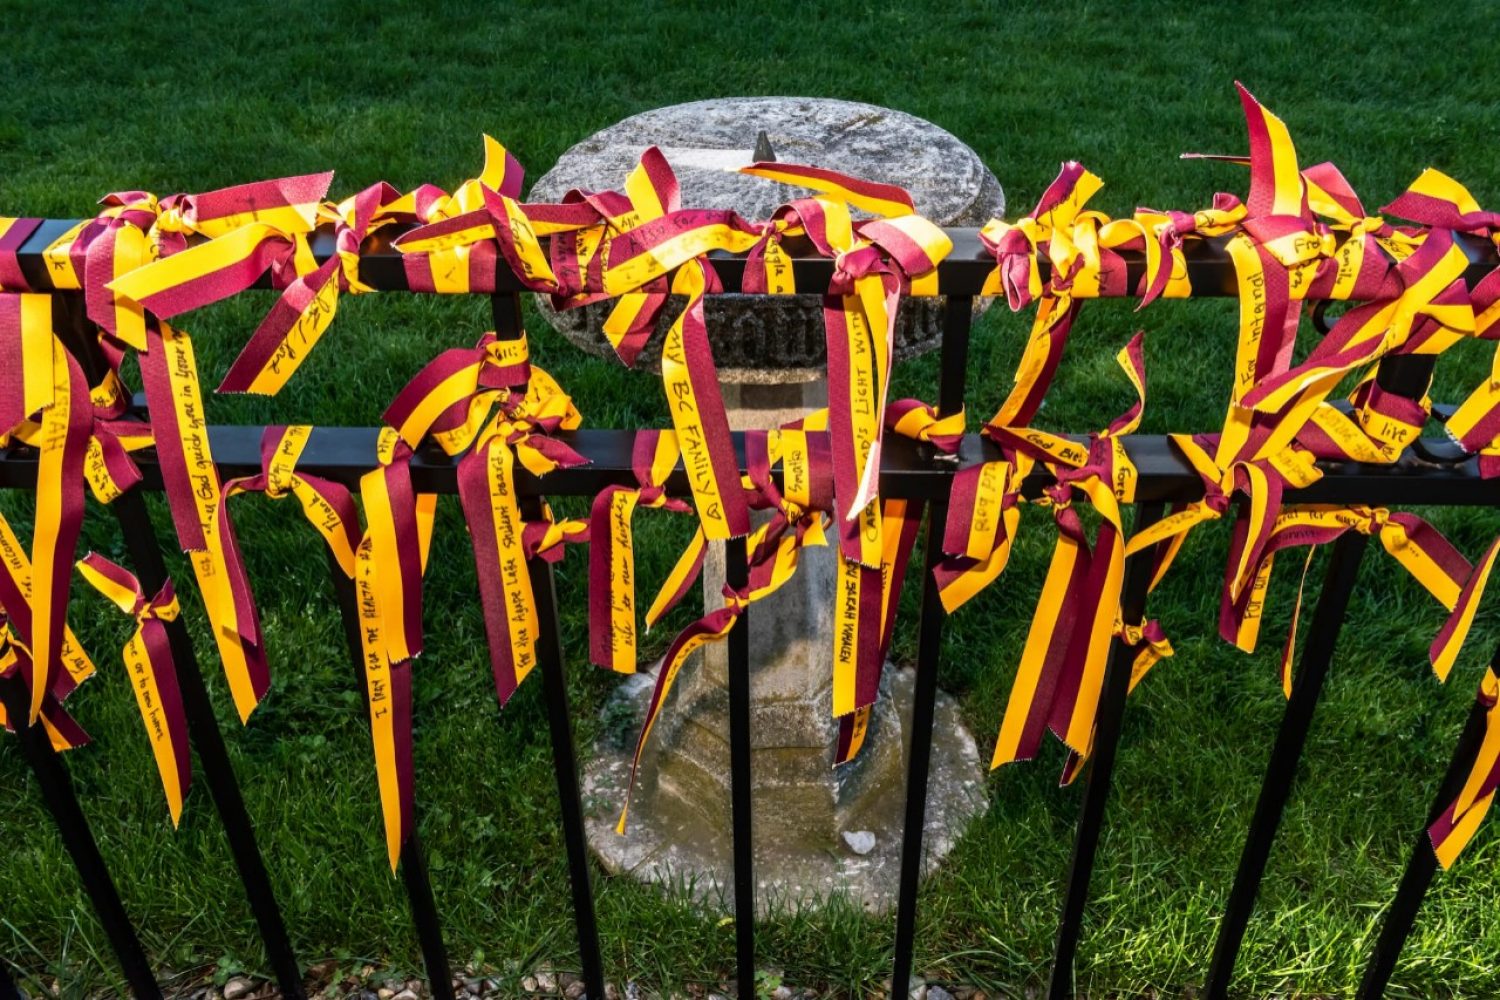 red and yellow ribbons with graduation messages written on them tied to a fence